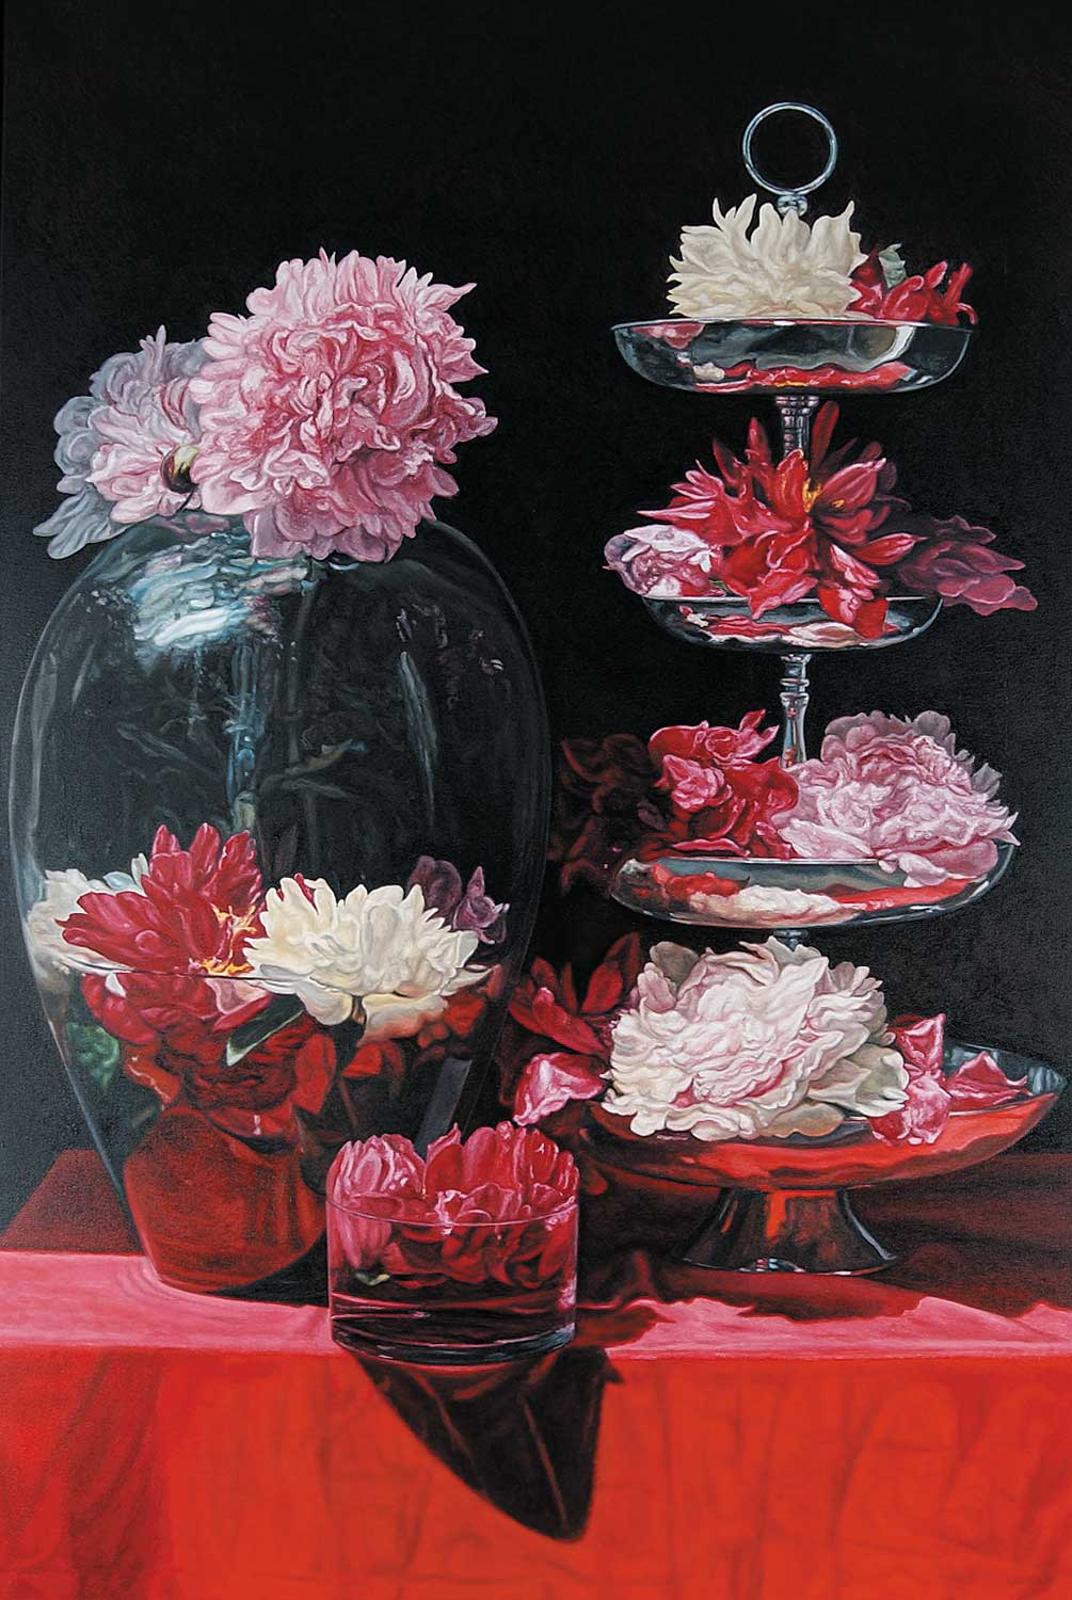 Robert Lemay (1961) - Peonies with Silver Platter